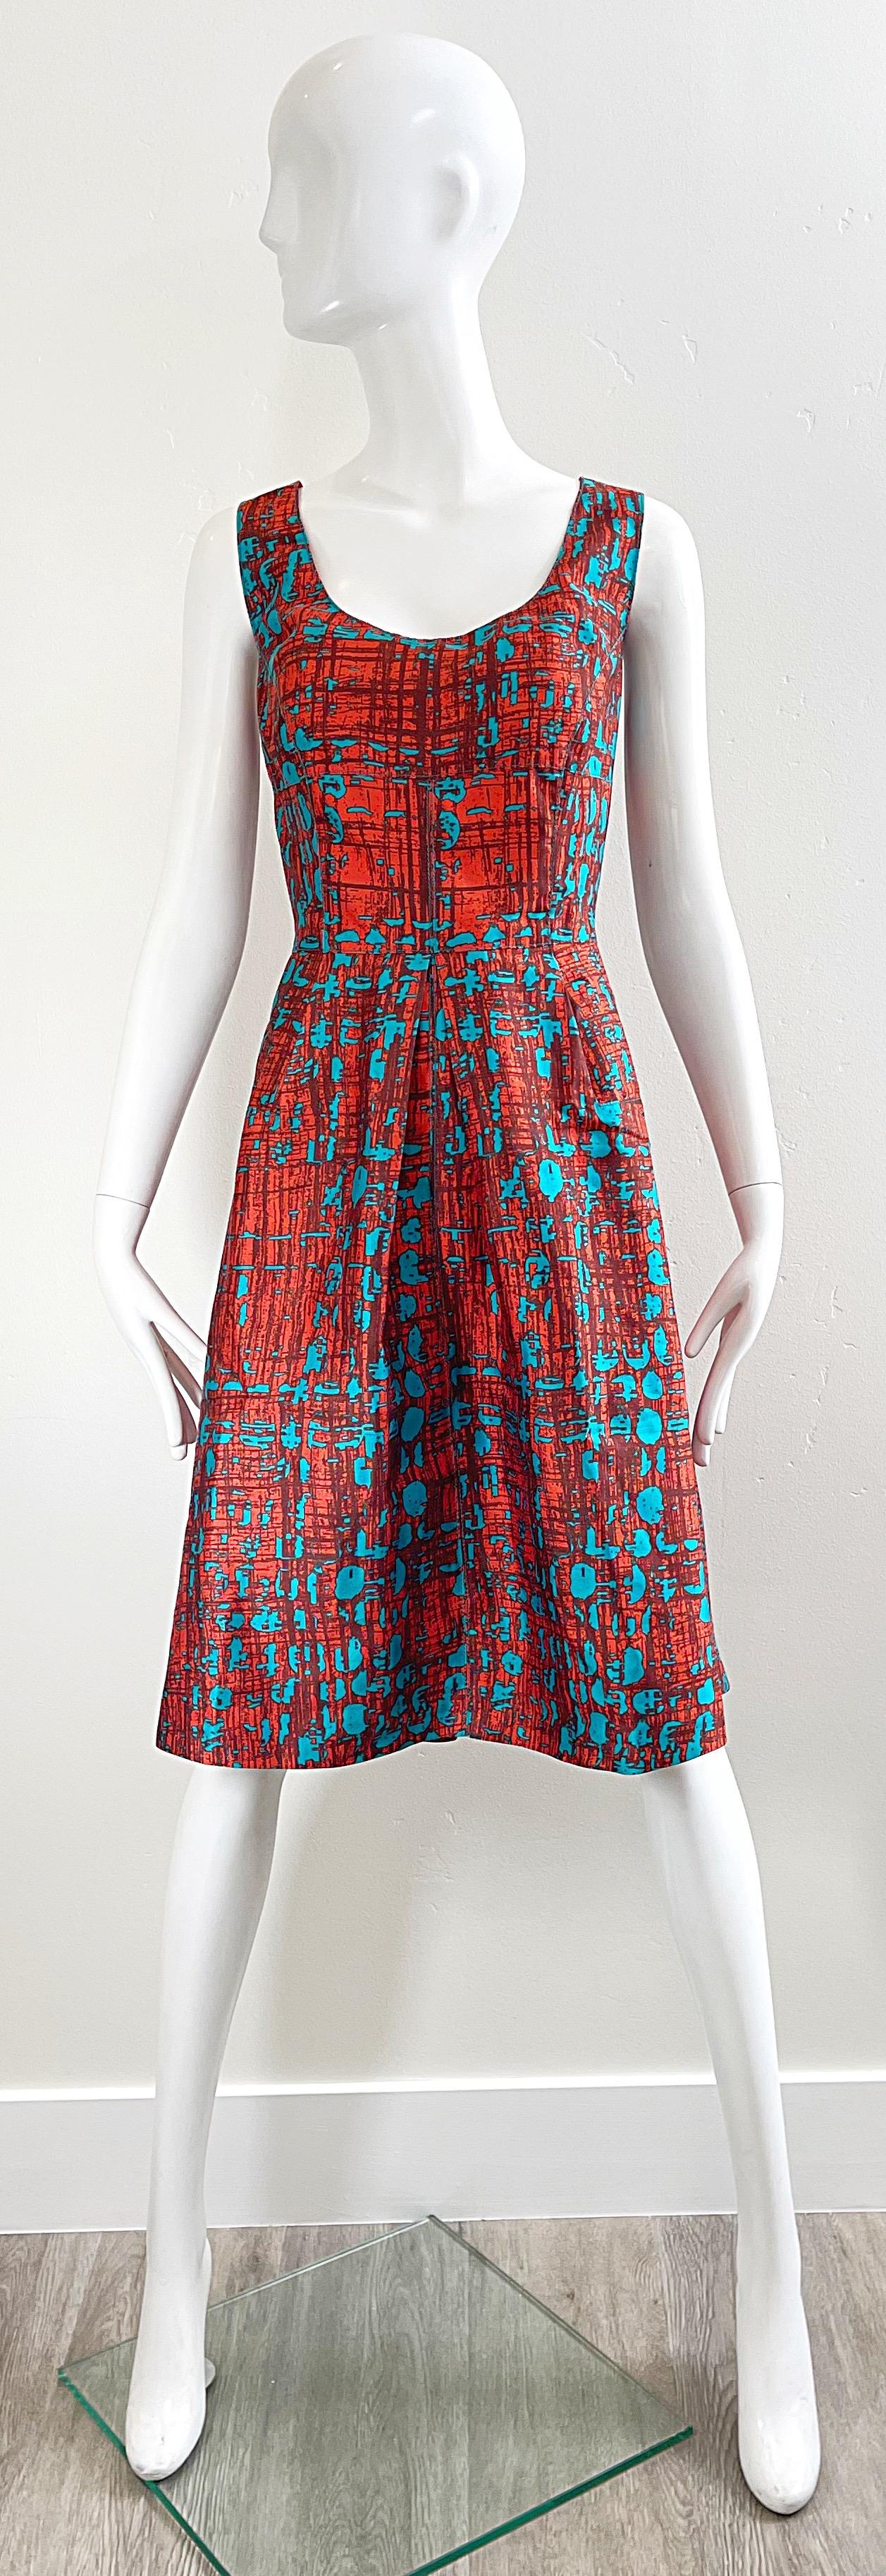 Chic early 2000s vintage OSCAR DE LA RENTA Size 14 orange and turquoise blue silk fit n’ flare cocktail dress ! Features a flattering abstract print. Tailored bodice with a forgiving full skirt. A crinoline could be worn under for an even fuller